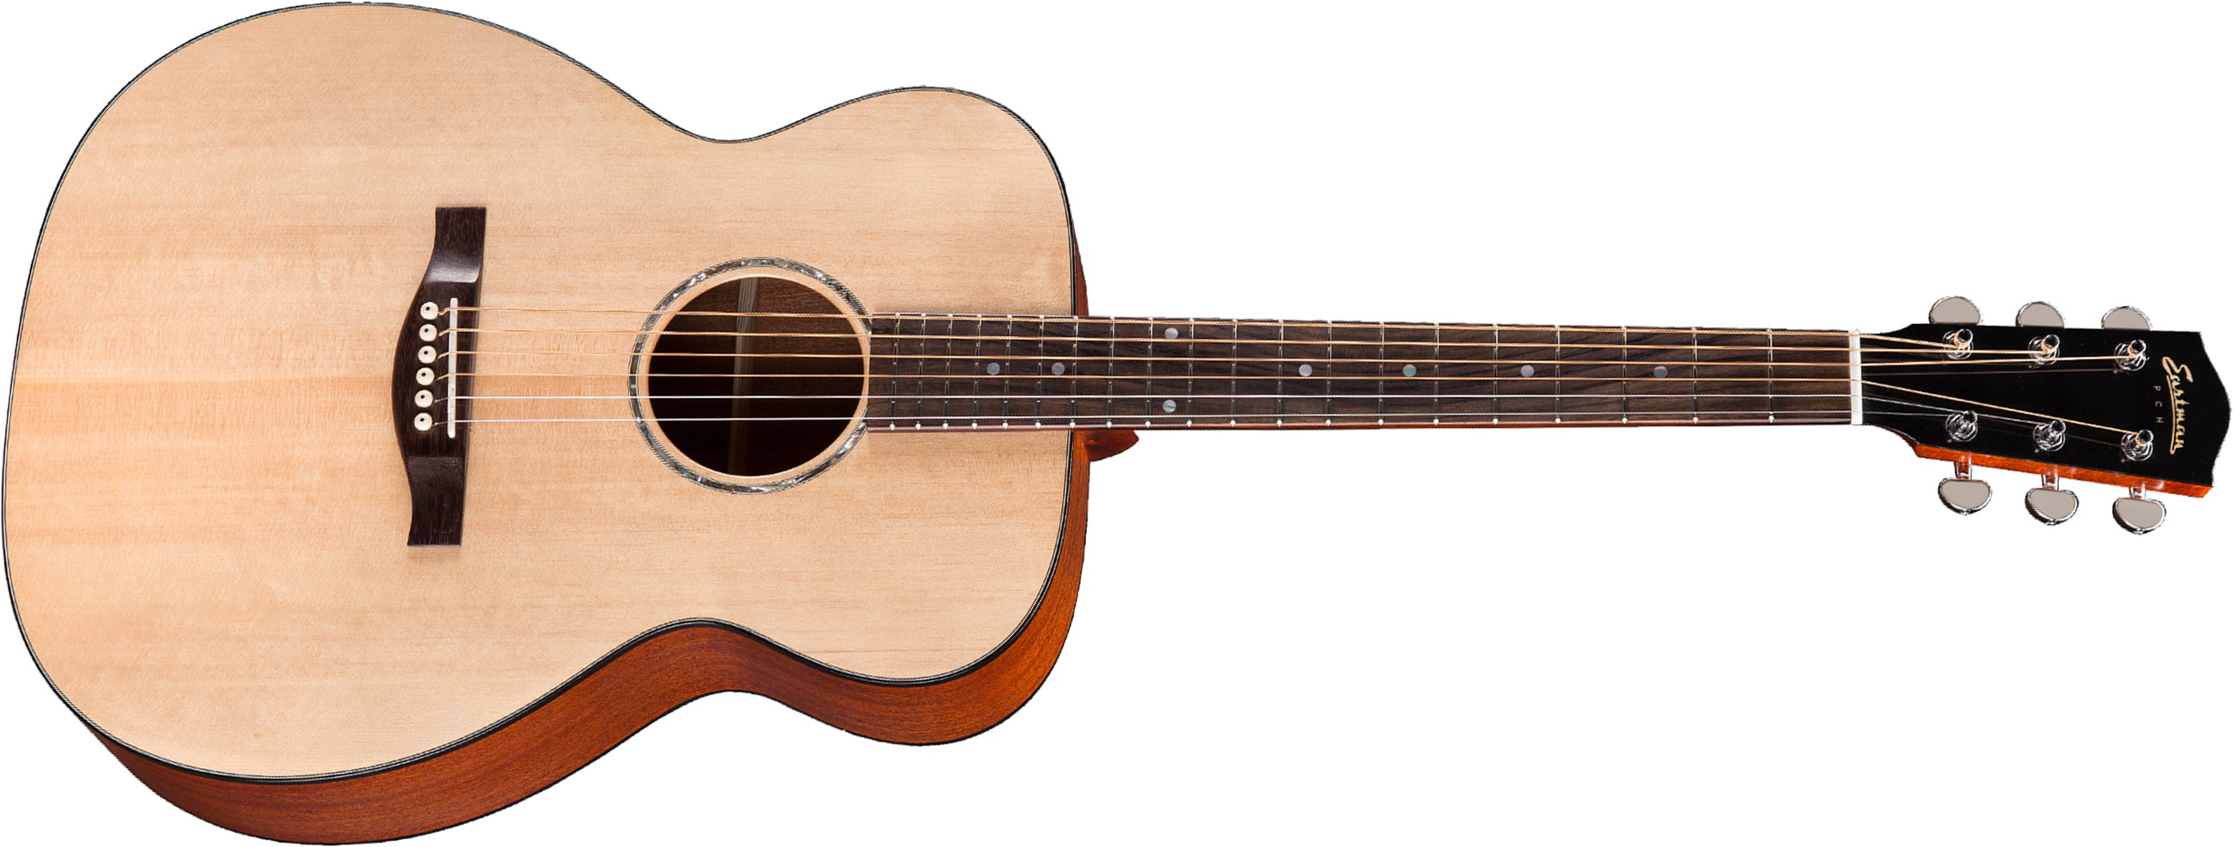 Eastman Pch1-om Orchestra Model Epicea Sapele Rw - Natural Satin - Westerngitaar & electro - Main picture